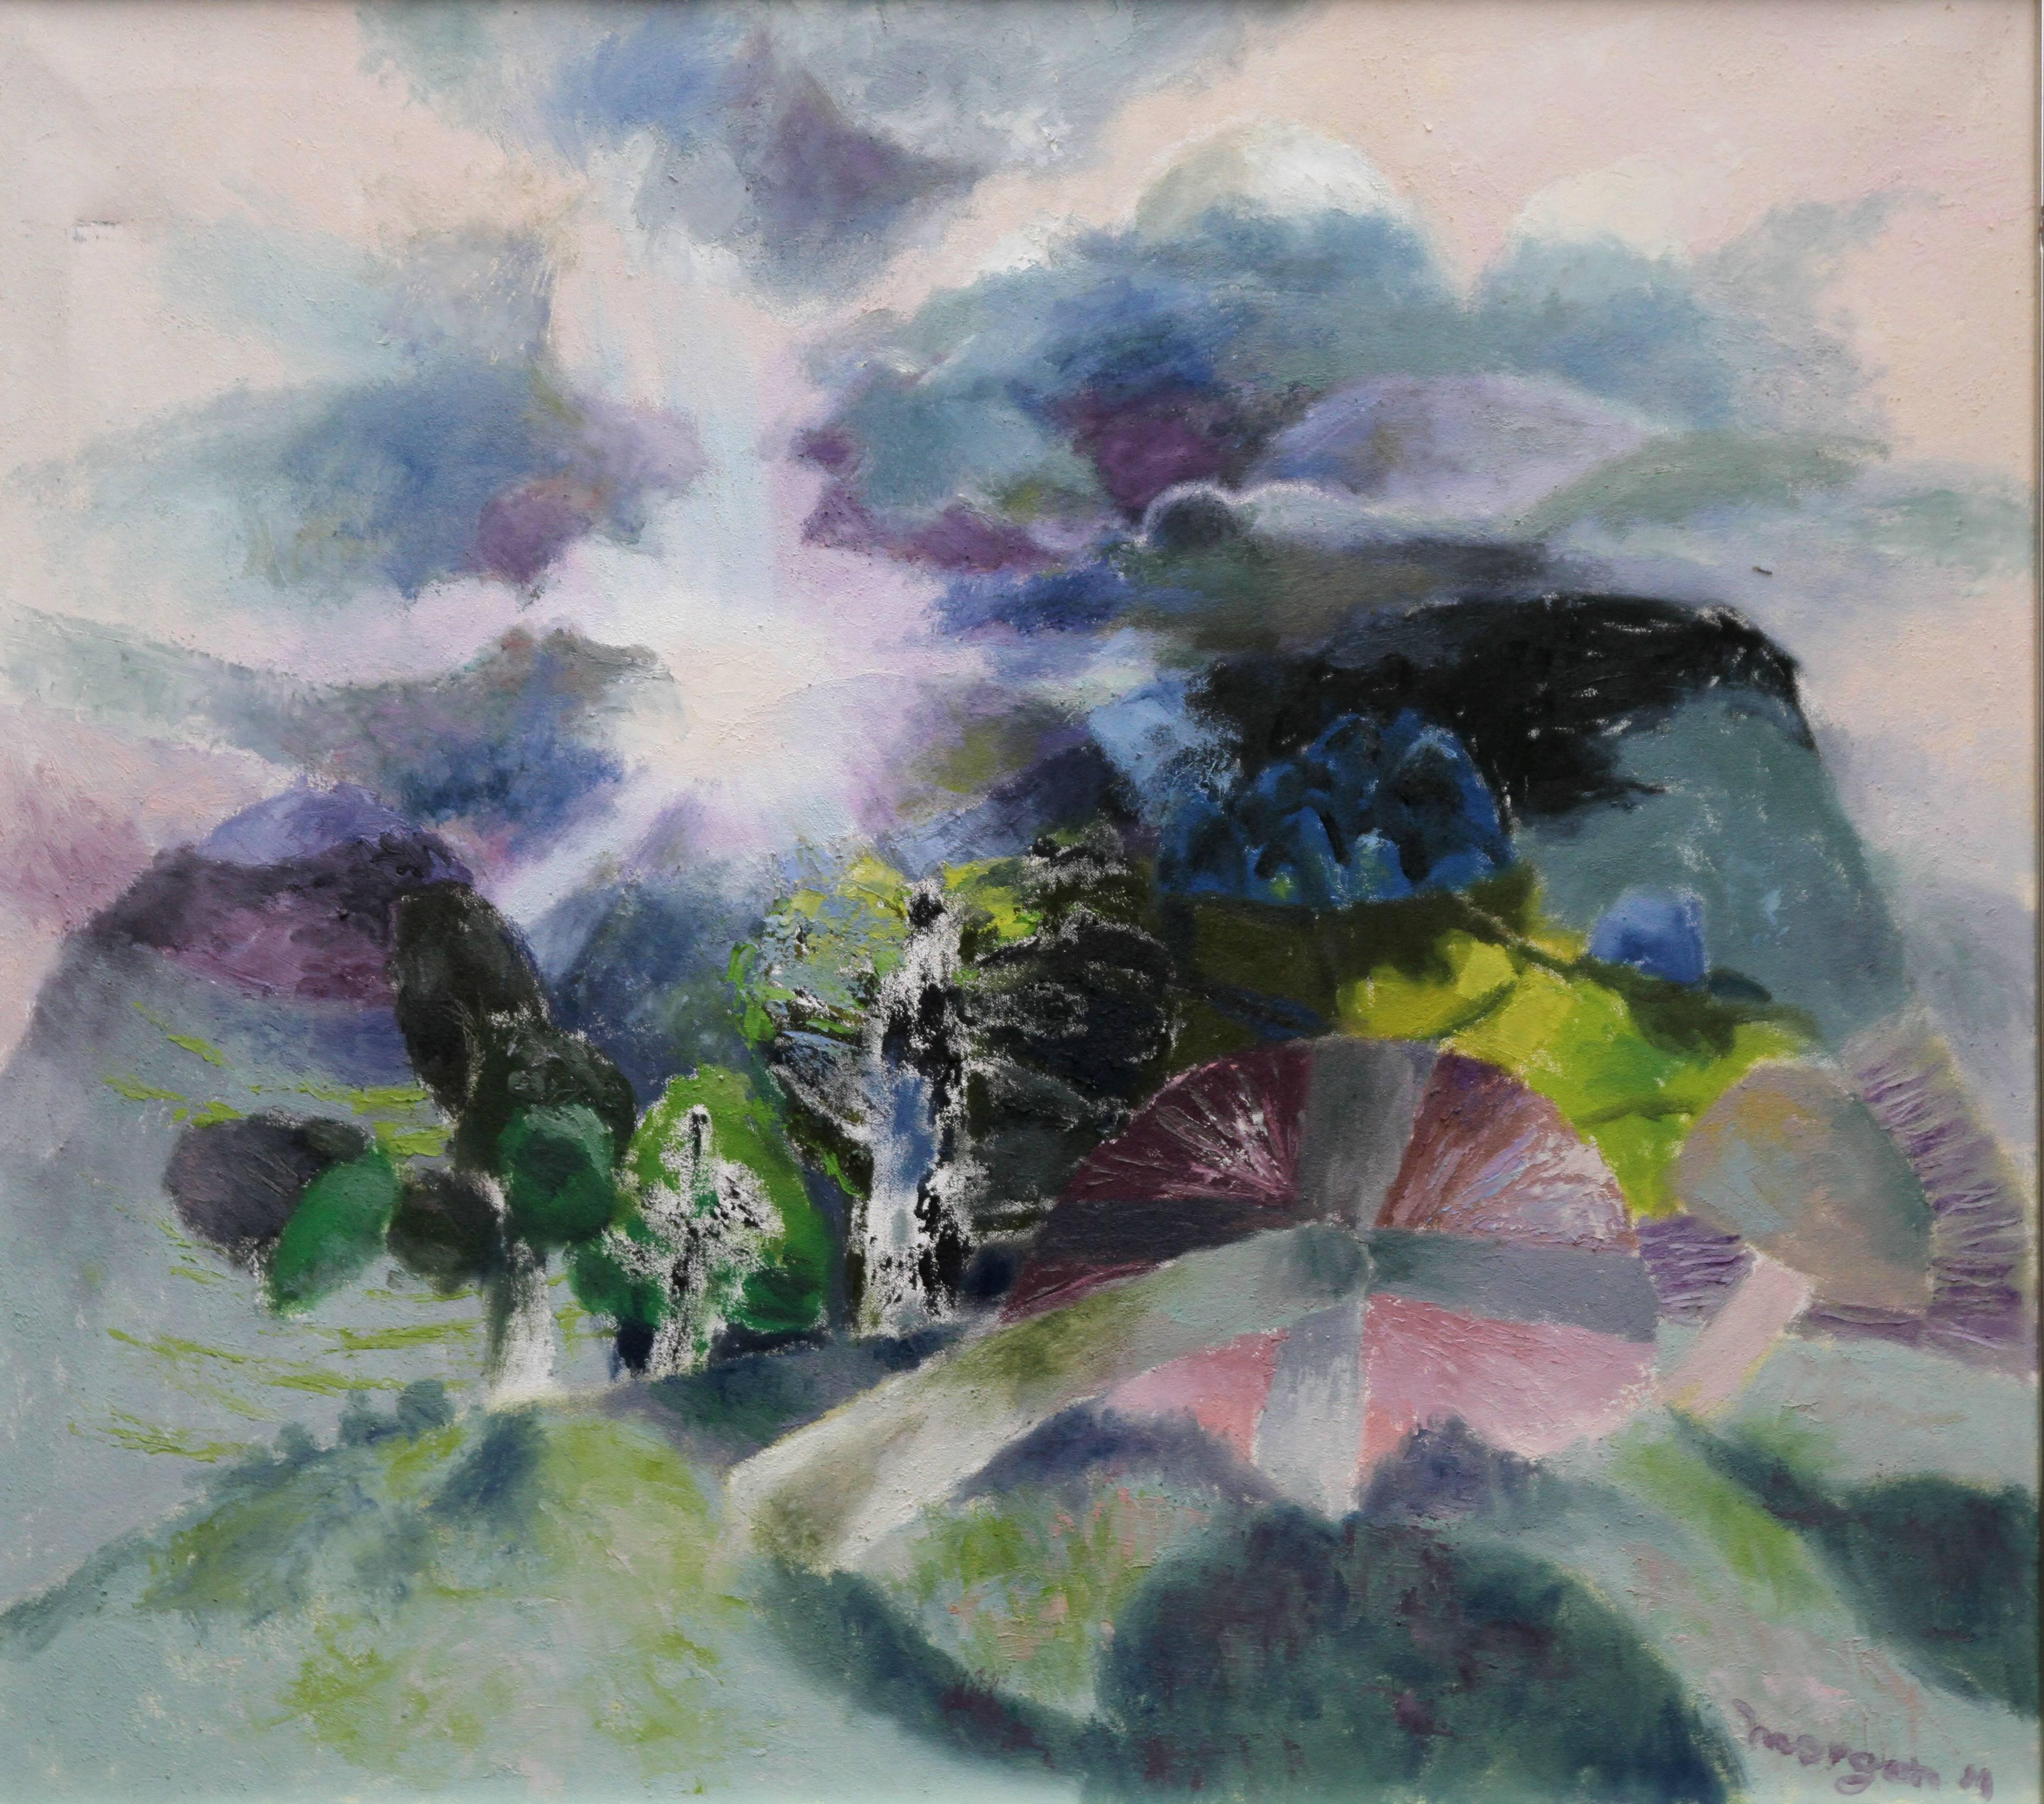 Glyn Morgan Abstract Painting - Landscape with Mushrooms - Welsh art Abstract 1985 oil painting field nature